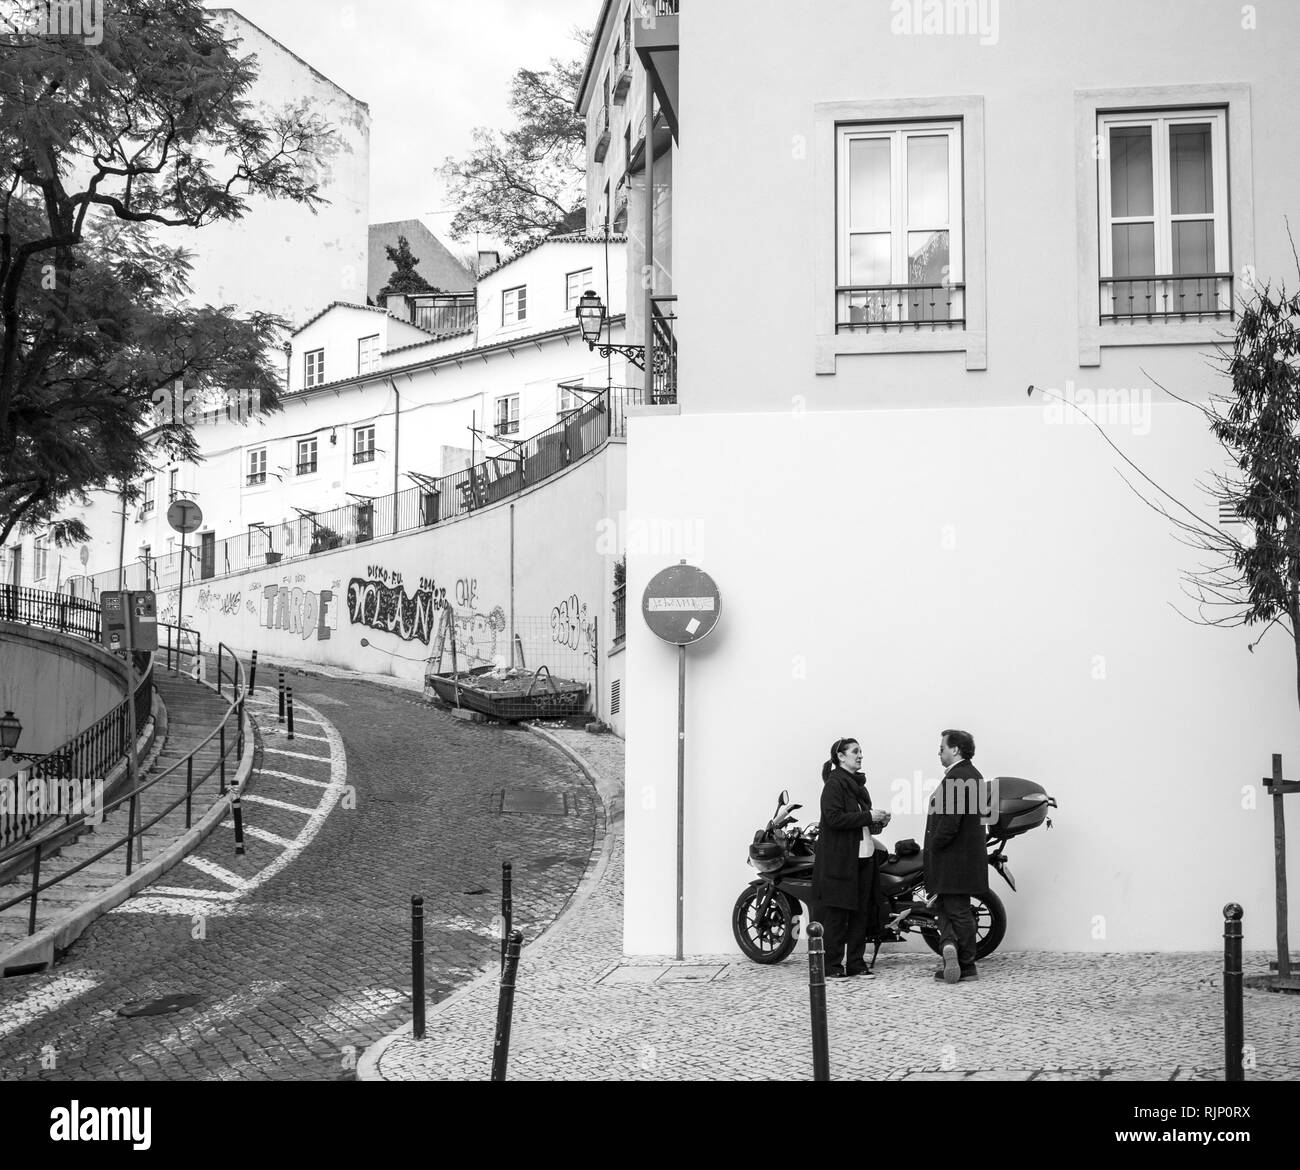 LISBON, PORTUGAL - FEB 9, 2018: Side view of adult man and woman standing on paved street near motorcycle and talking against white wall Stock Photo